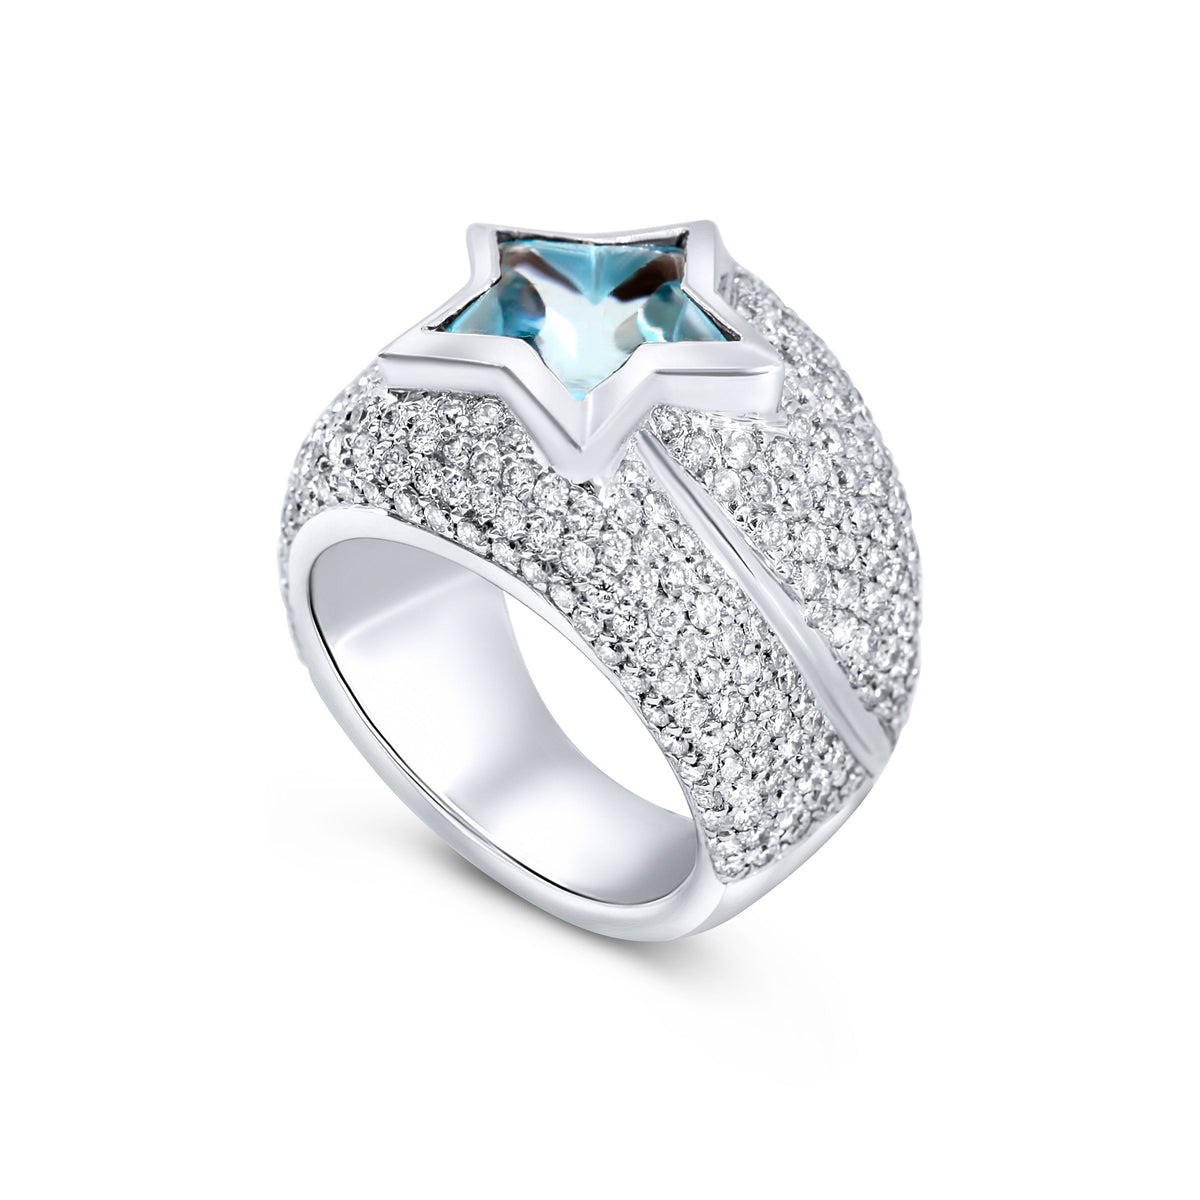 North Star Cocktail Ring with Aquamarine